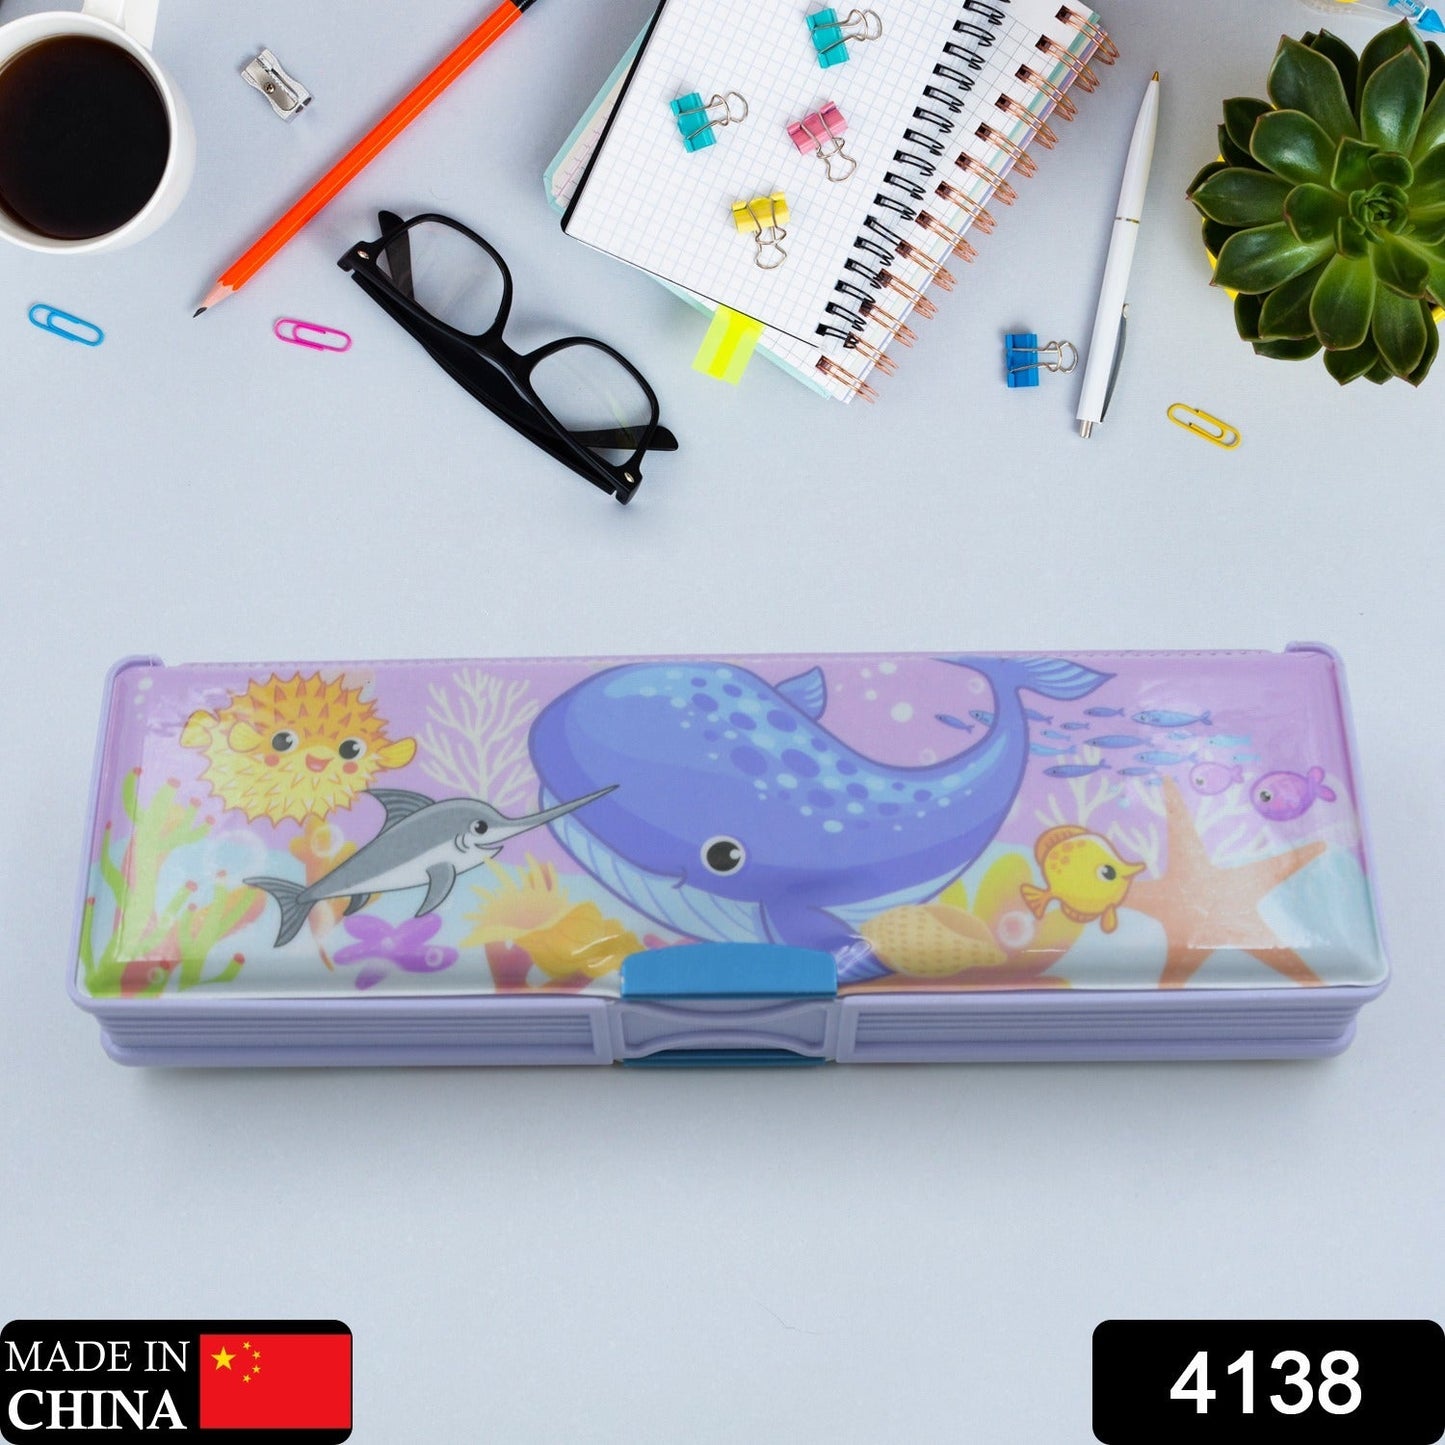 4138 Multipurpose Compass Box, Plastic Double Deck Pencil Case with 2 Compartments, Supplies Utility Box Storage Organizer, Pencil Box for School, Cartoon Printed Pencil Case for Kids, Birthday Gift for Girls & Boys